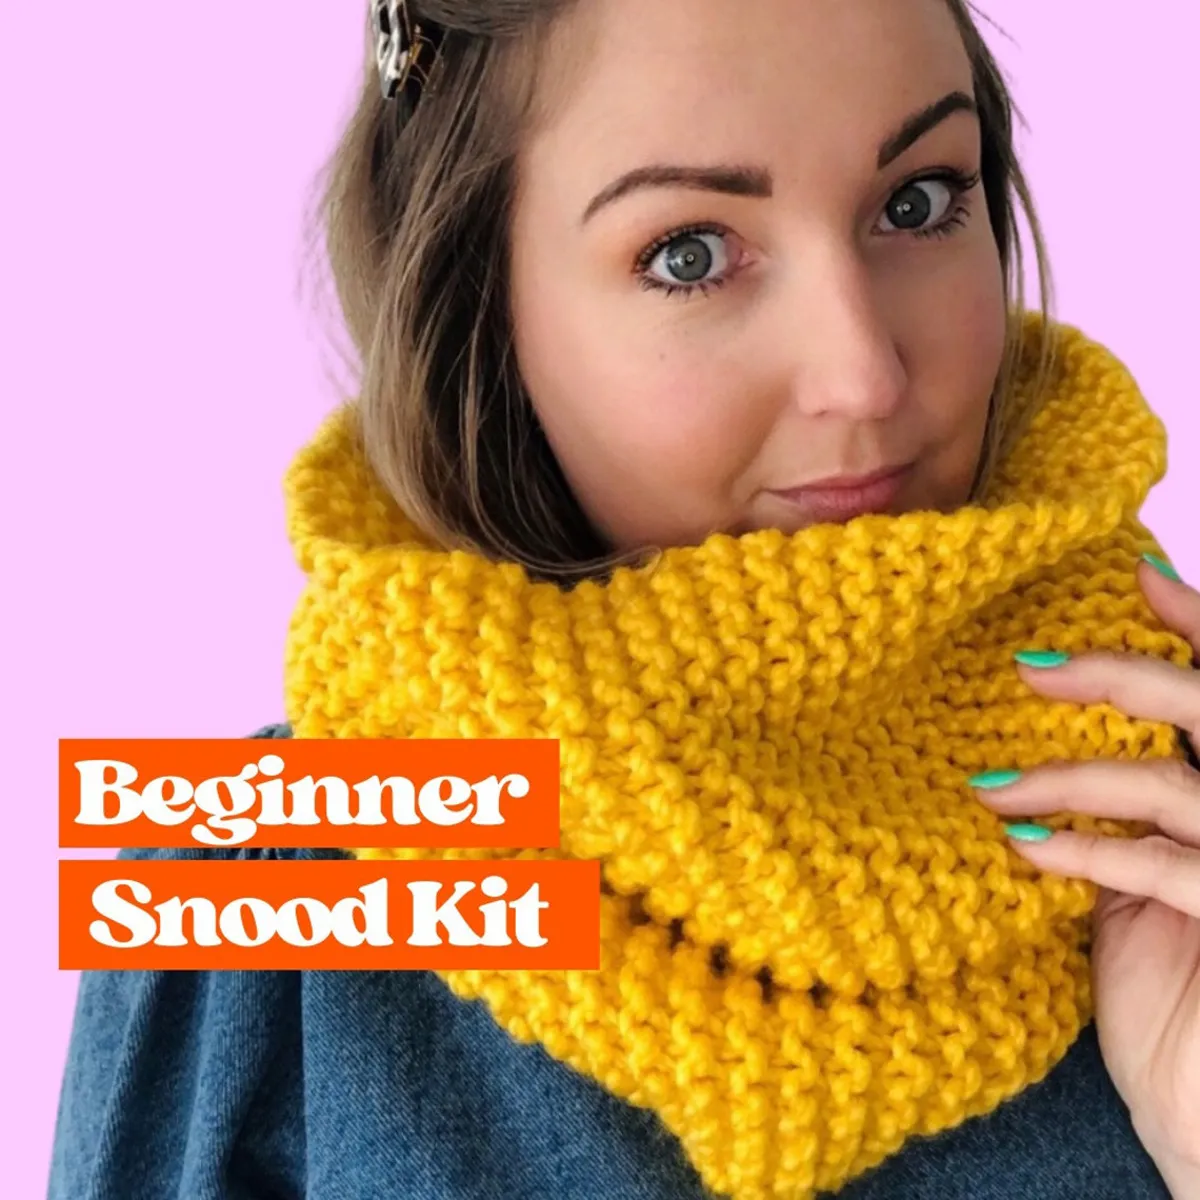 Learn to Knit Kit: Knitting Kit, Beginners Crafts Project, NEW